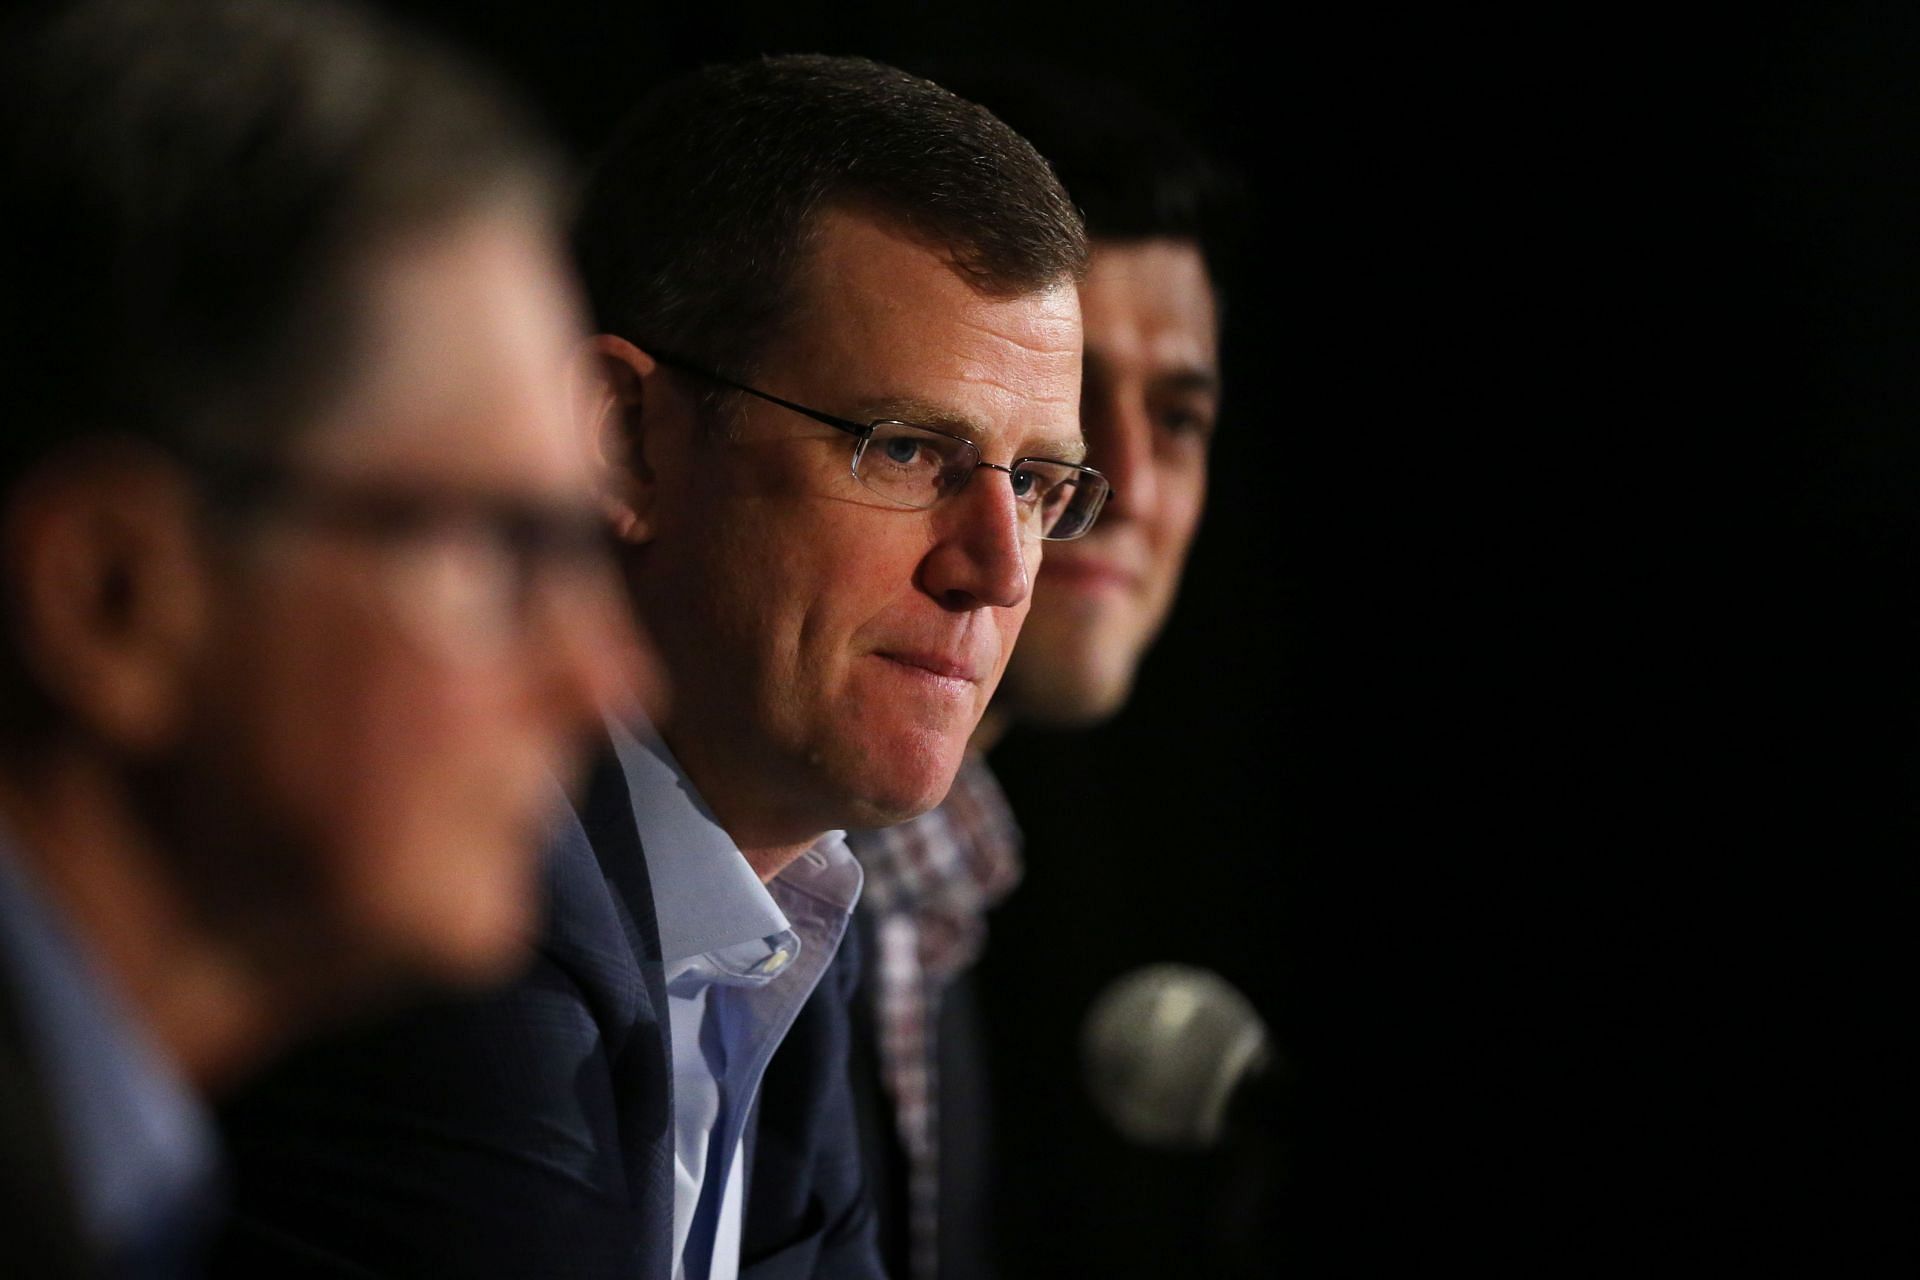 Boston Red Sox News Conference (via Getty Images)